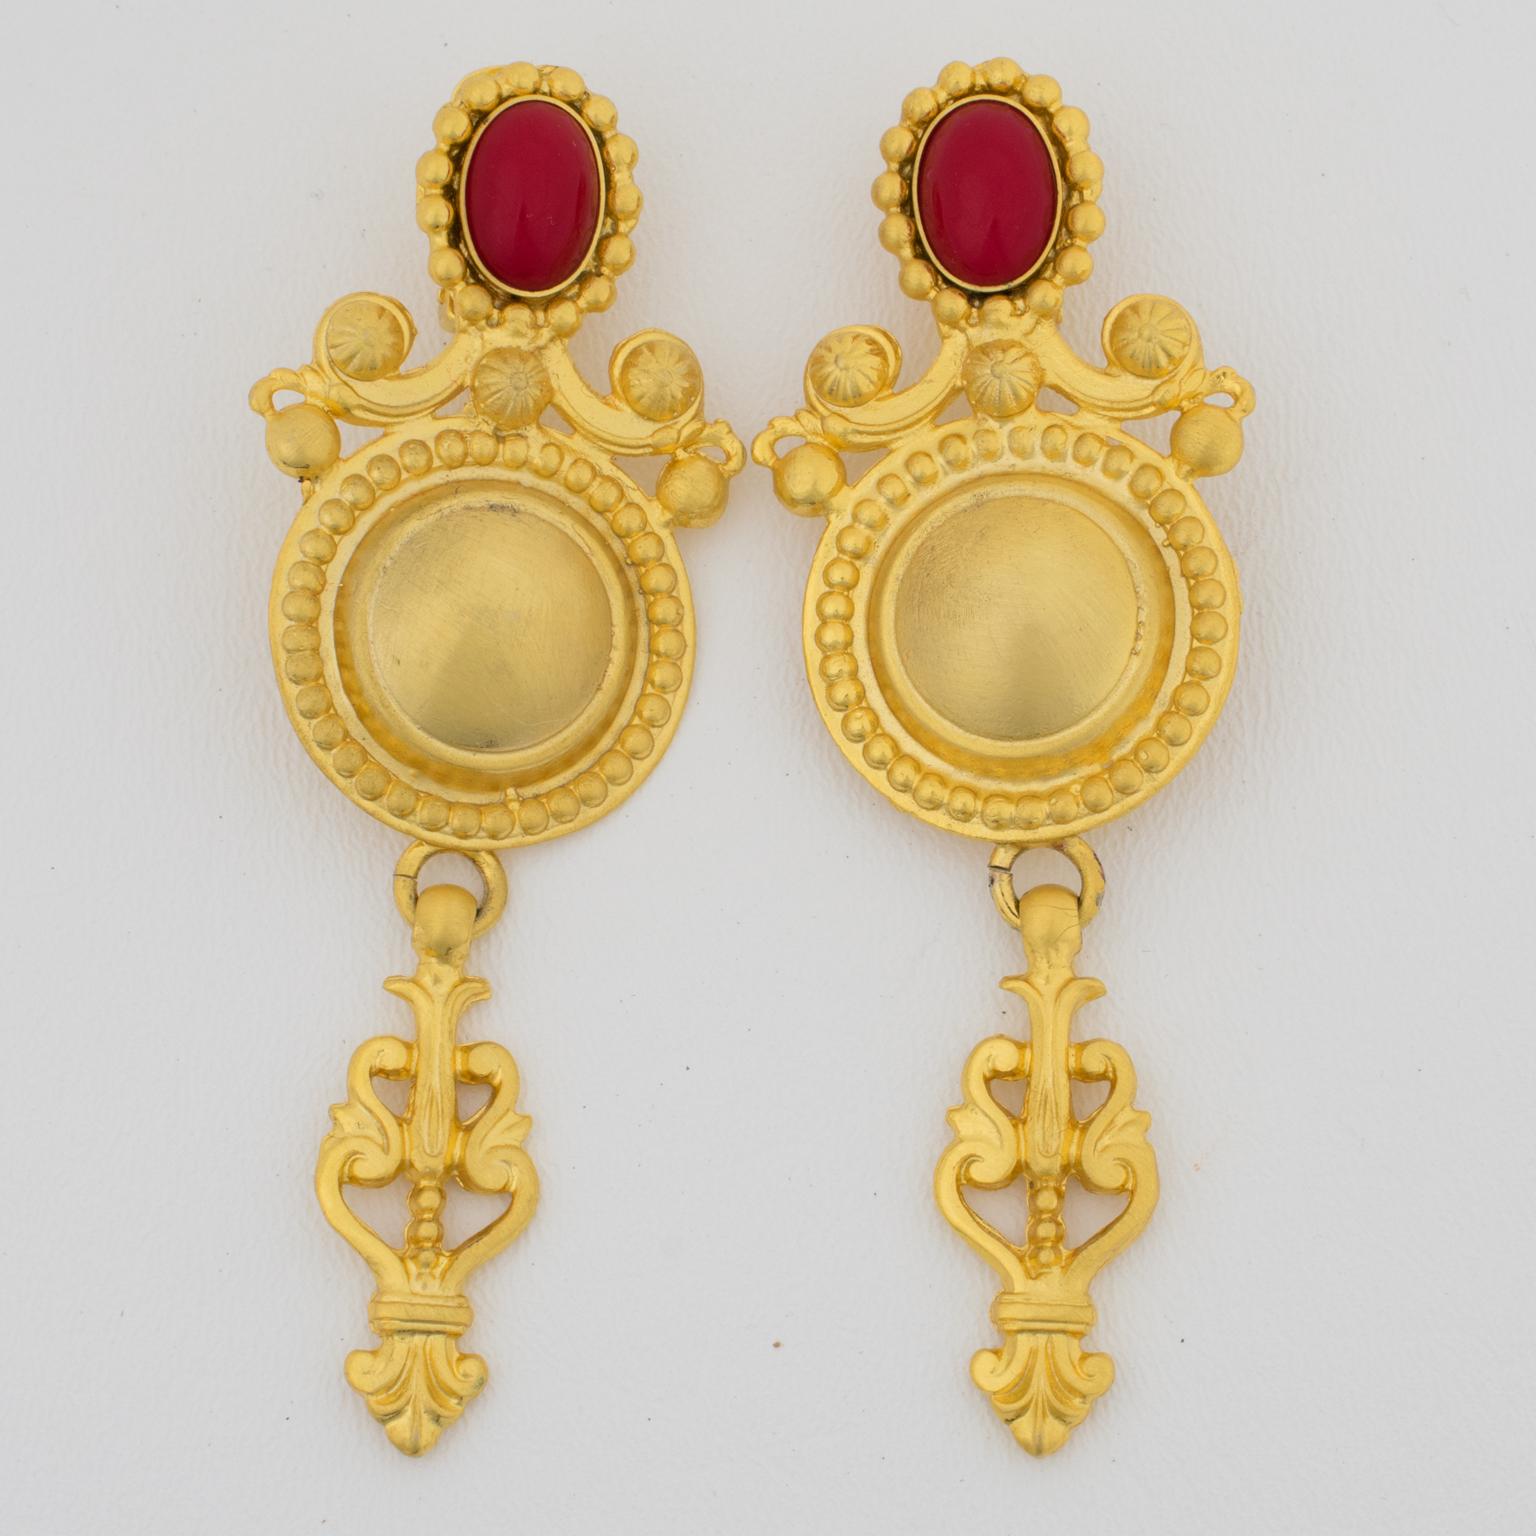 Baroque Revival Gianfranco Ferre Gilt Metal Baroque Clip Earrings with Red Cabochon For Sale